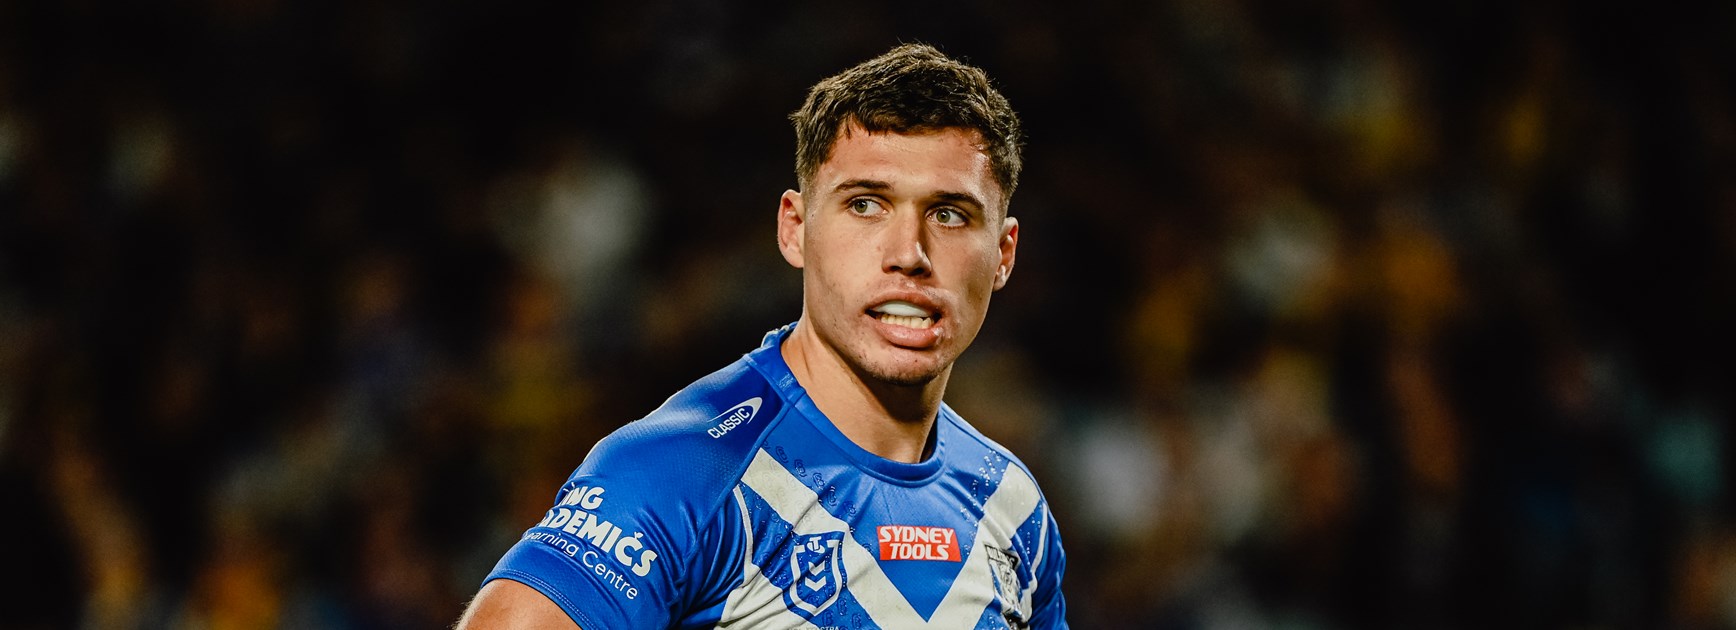 Jake Averillo ruled out of Titans fixture